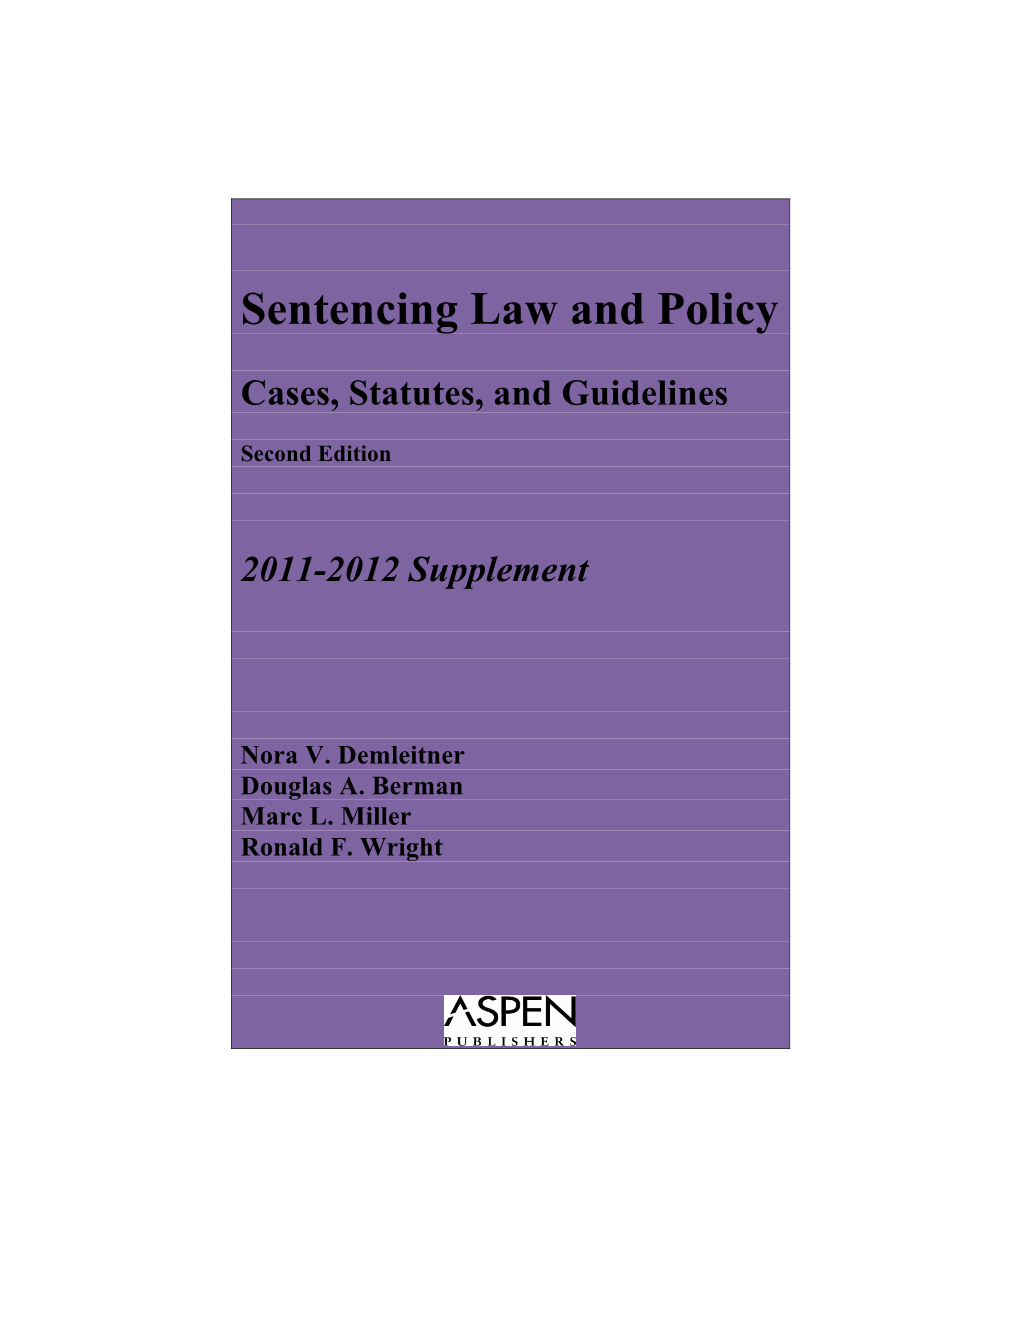 Sentencing Law and Policy Cases, Statutes, and Guidelines